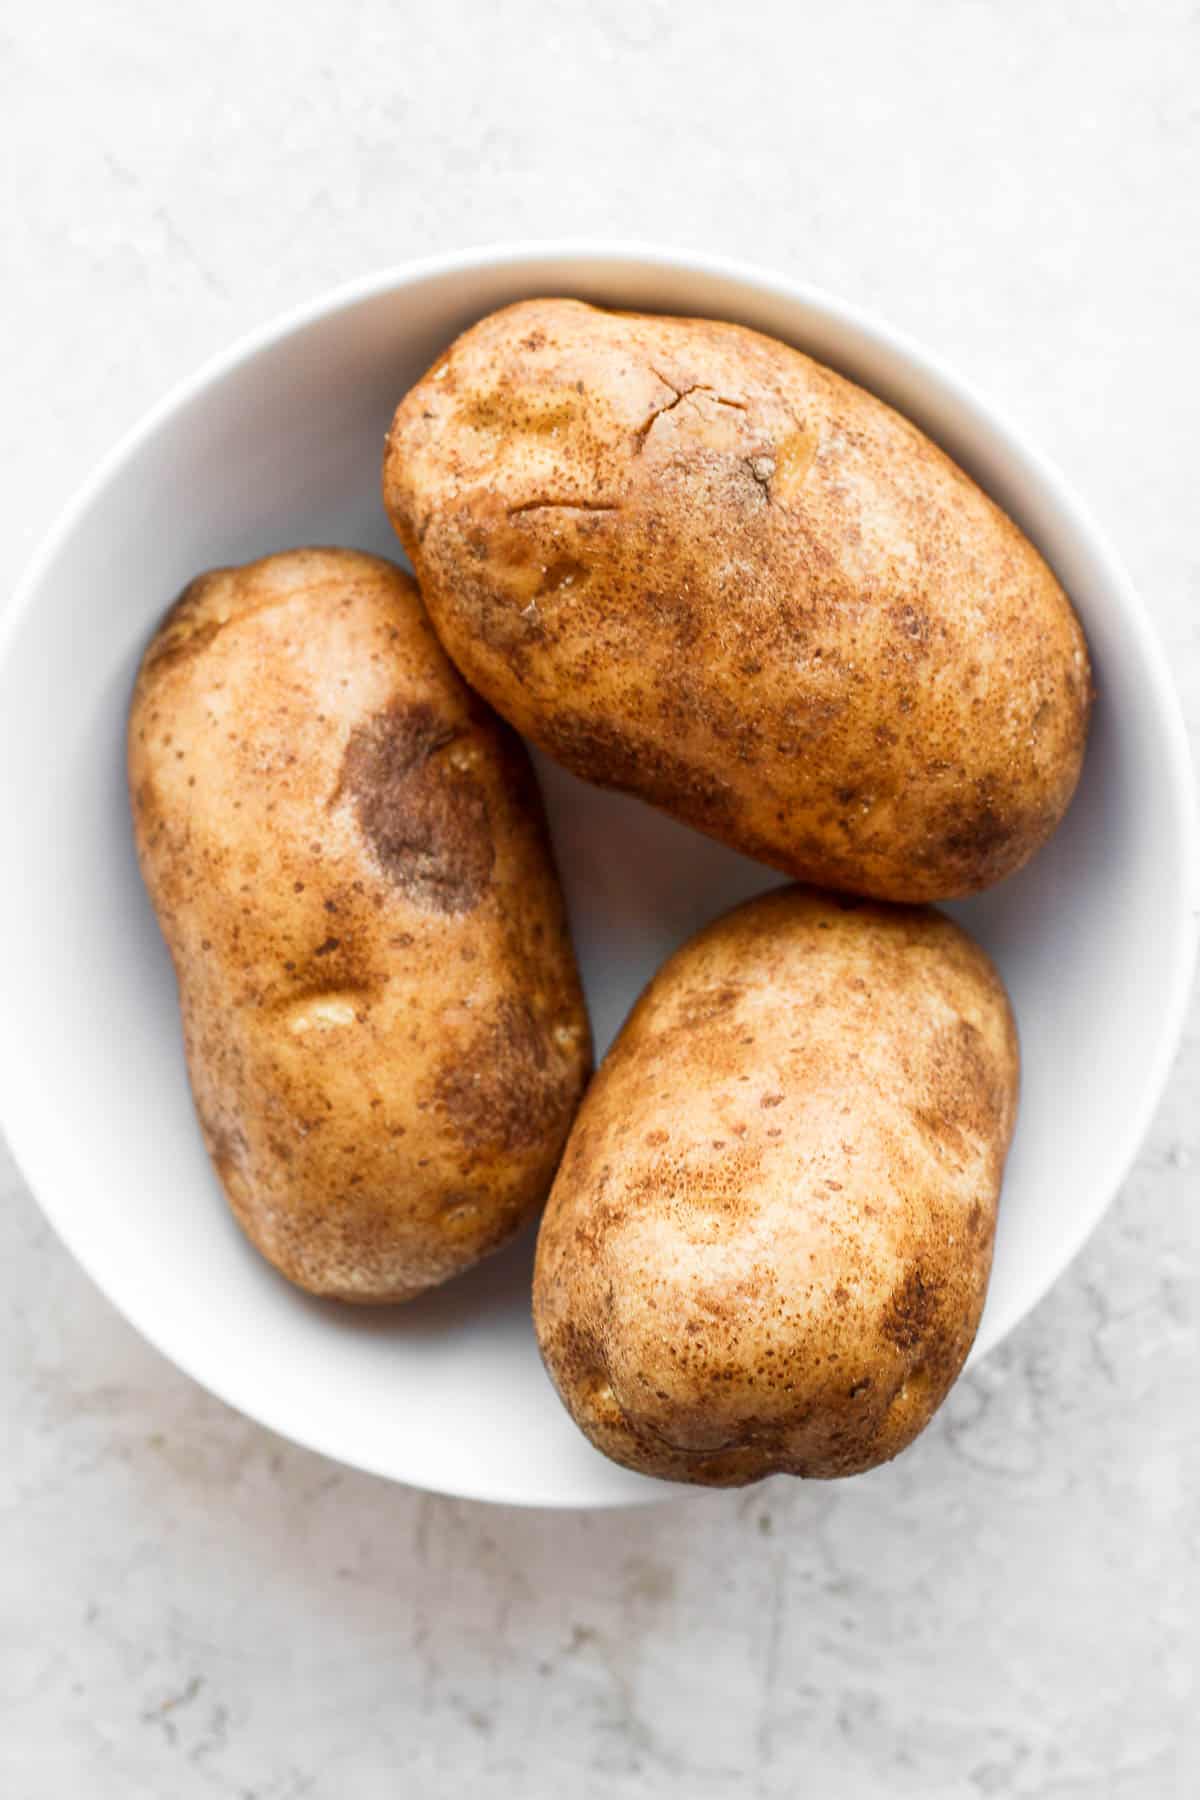 Three washed and dried potatoes in a white bowl.